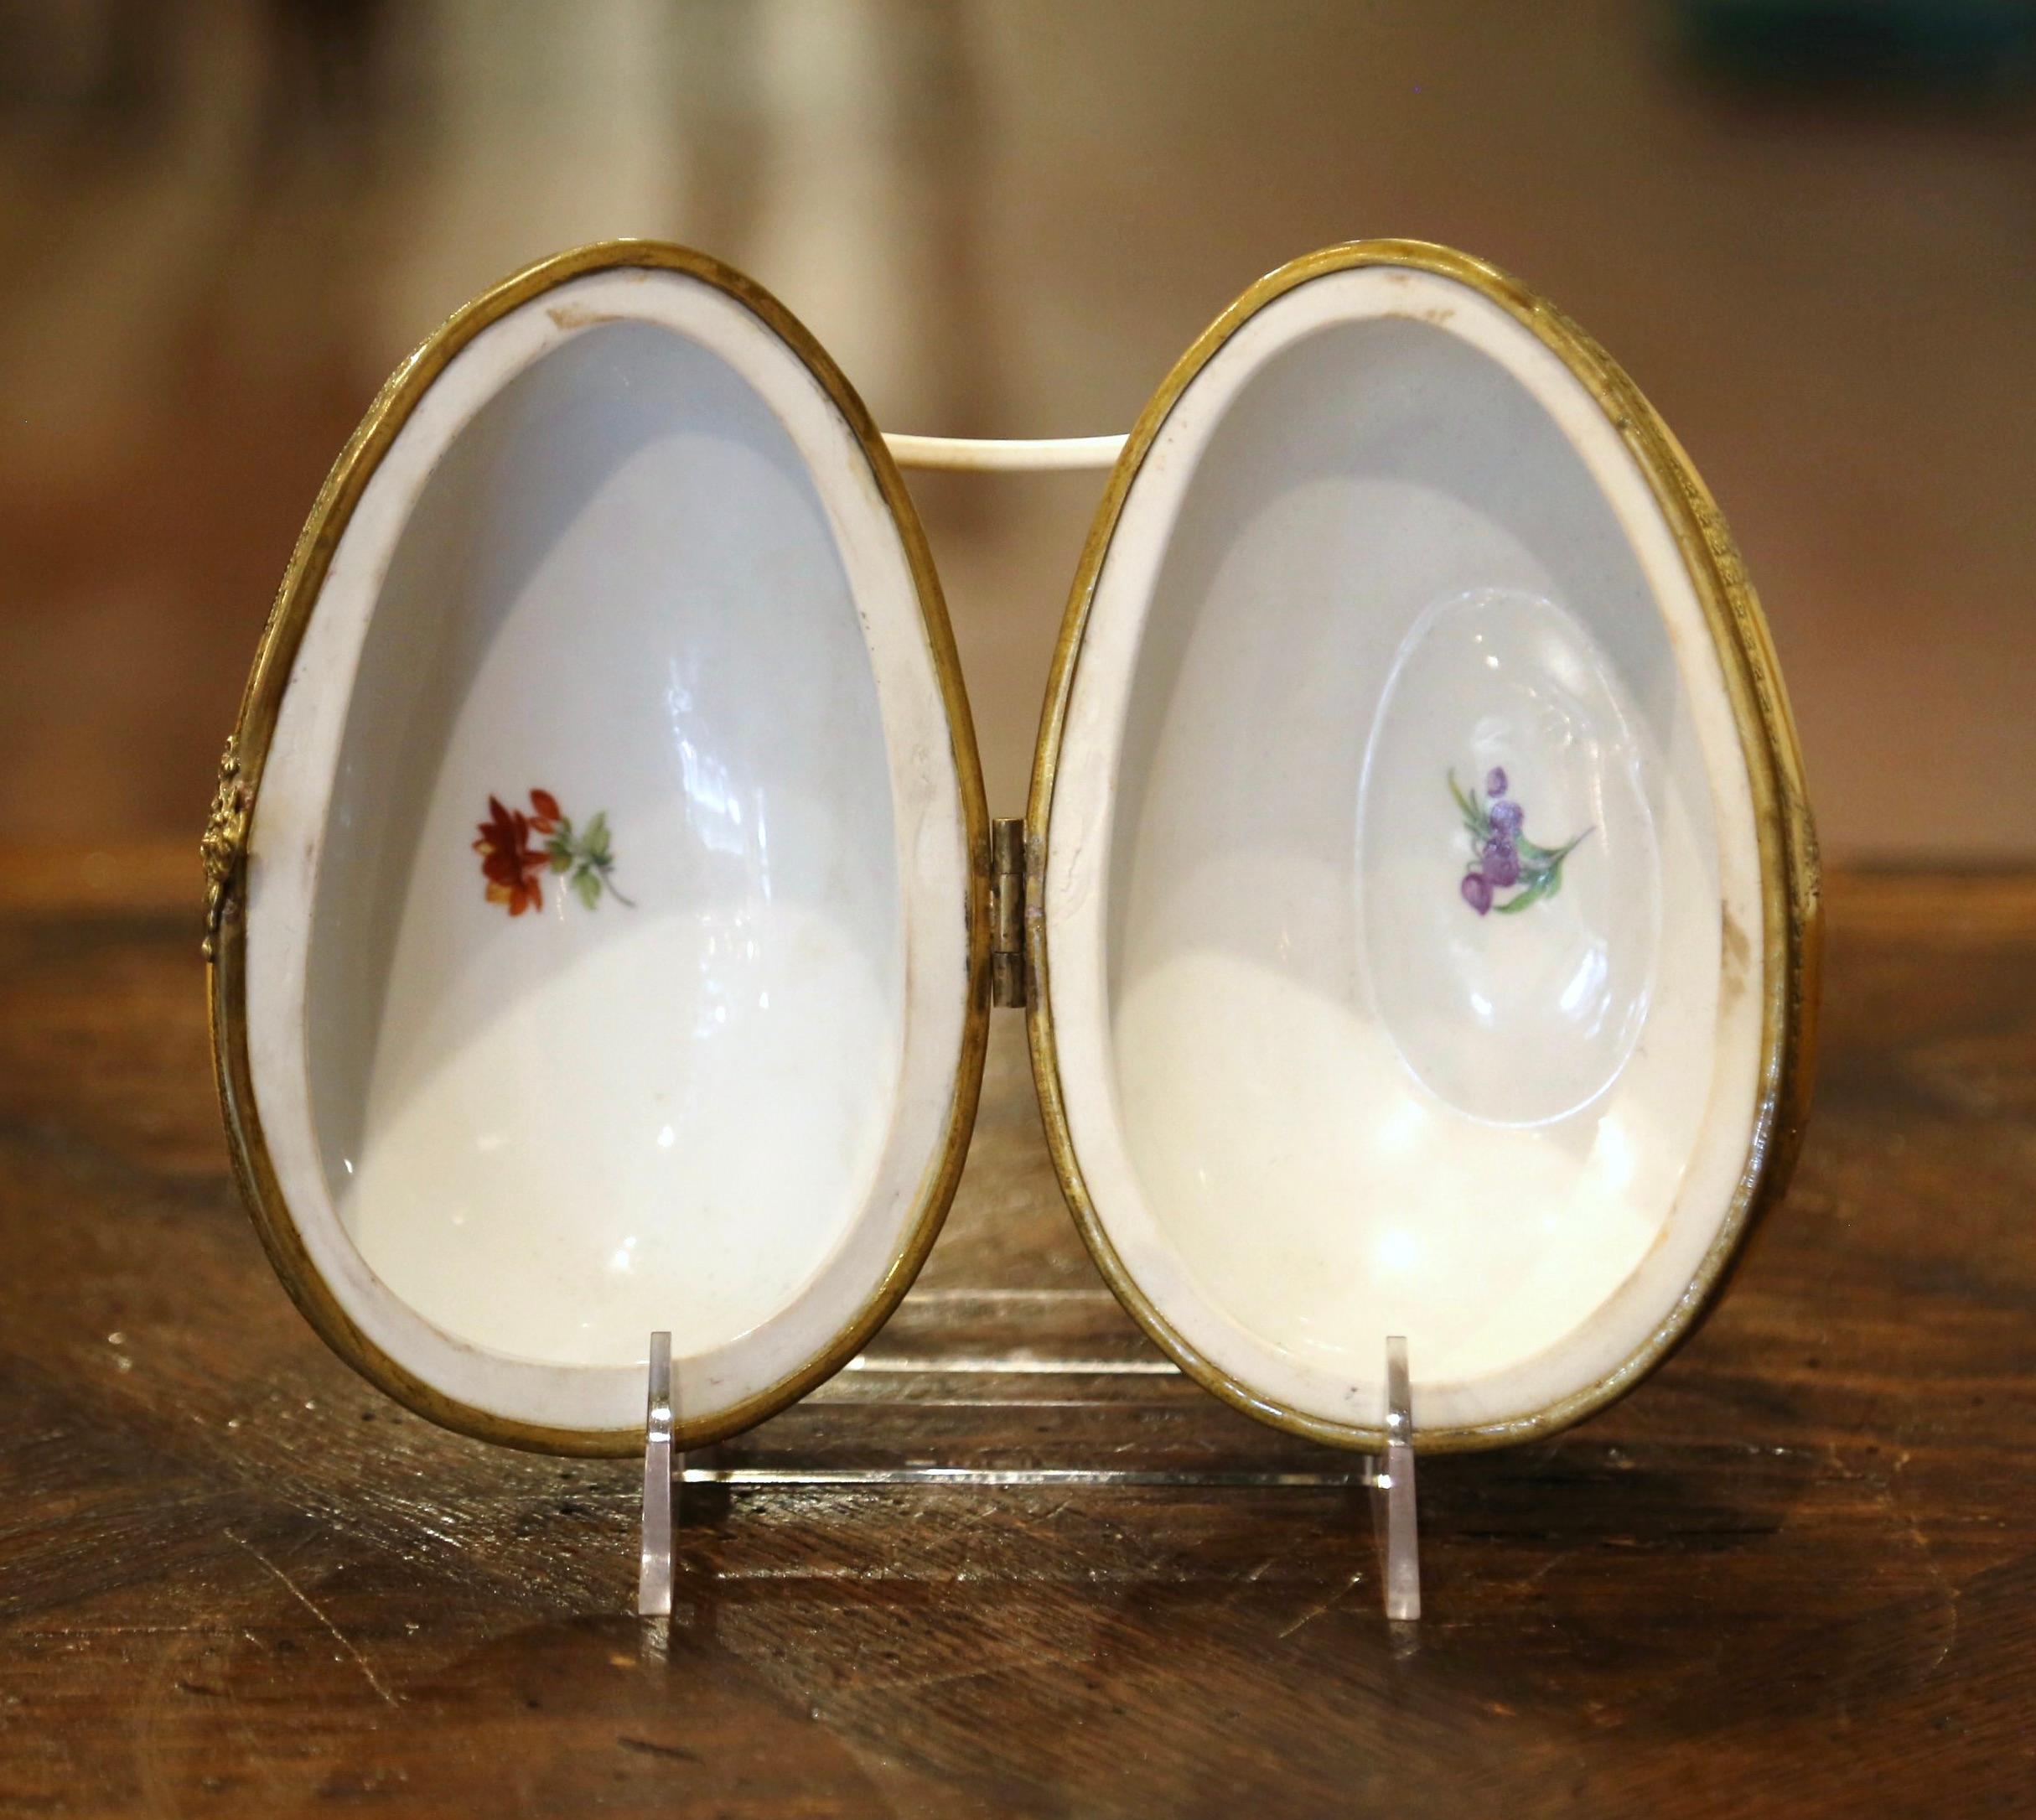 19th Century French Painted Faberge Porcelain Egg Trinket Boxes, Set of 5 6